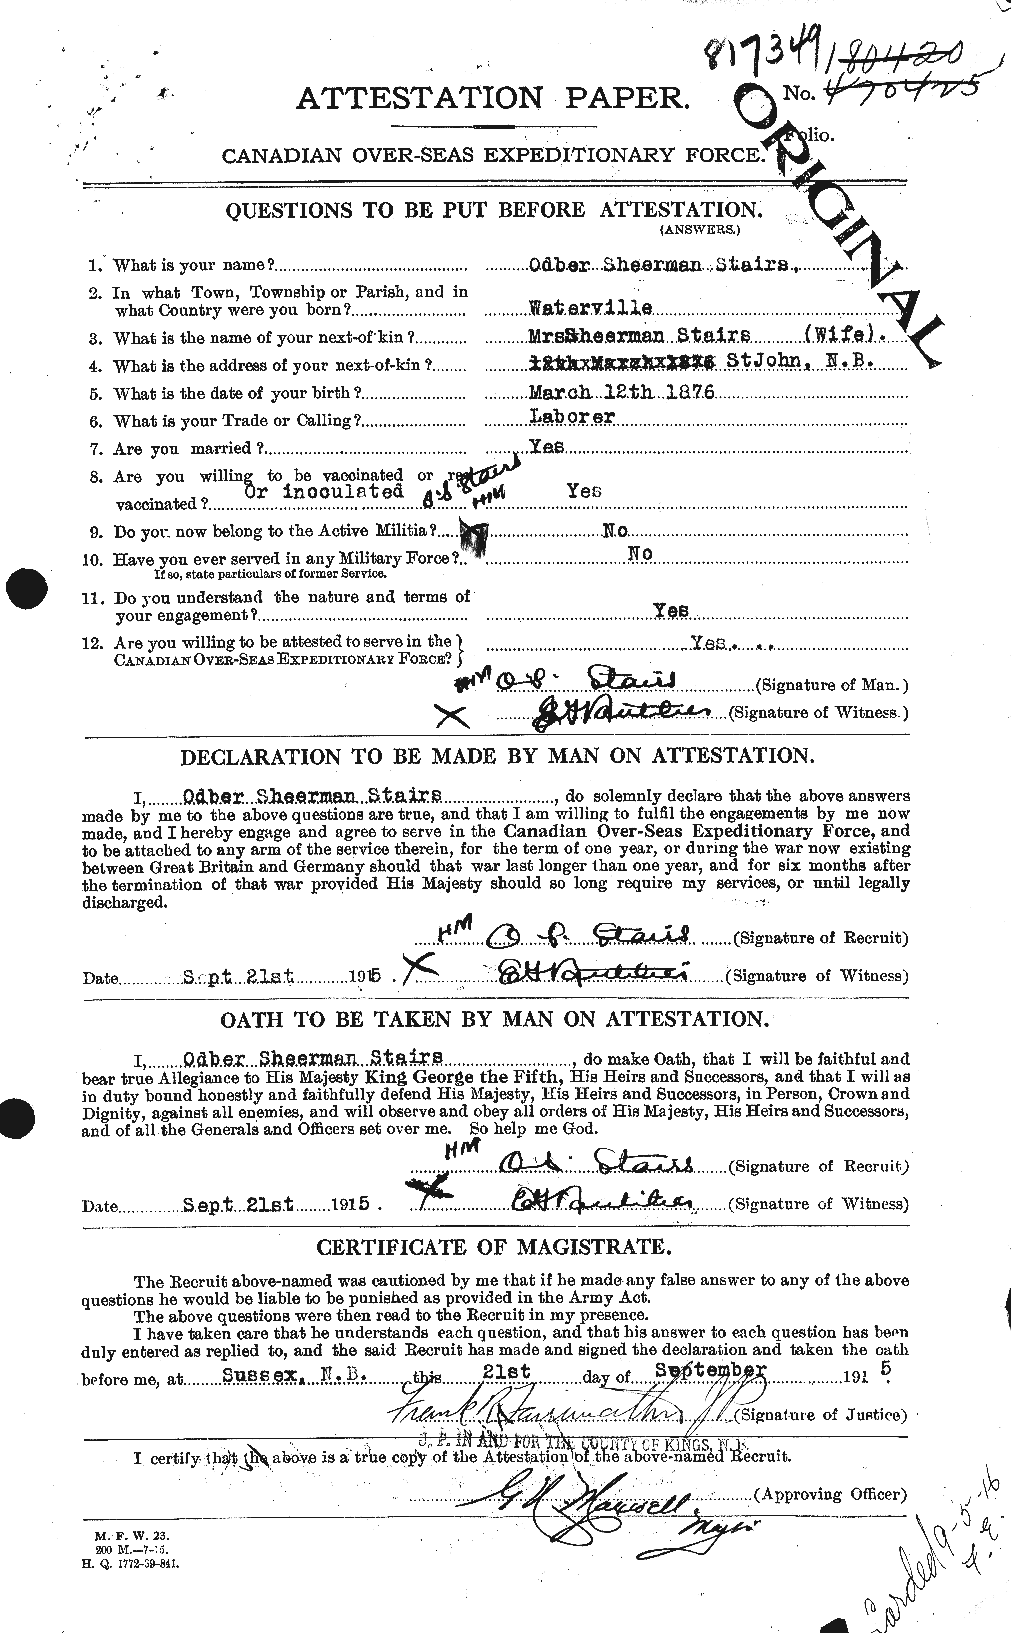 Personnel Records of the First World War - CEF 116687a